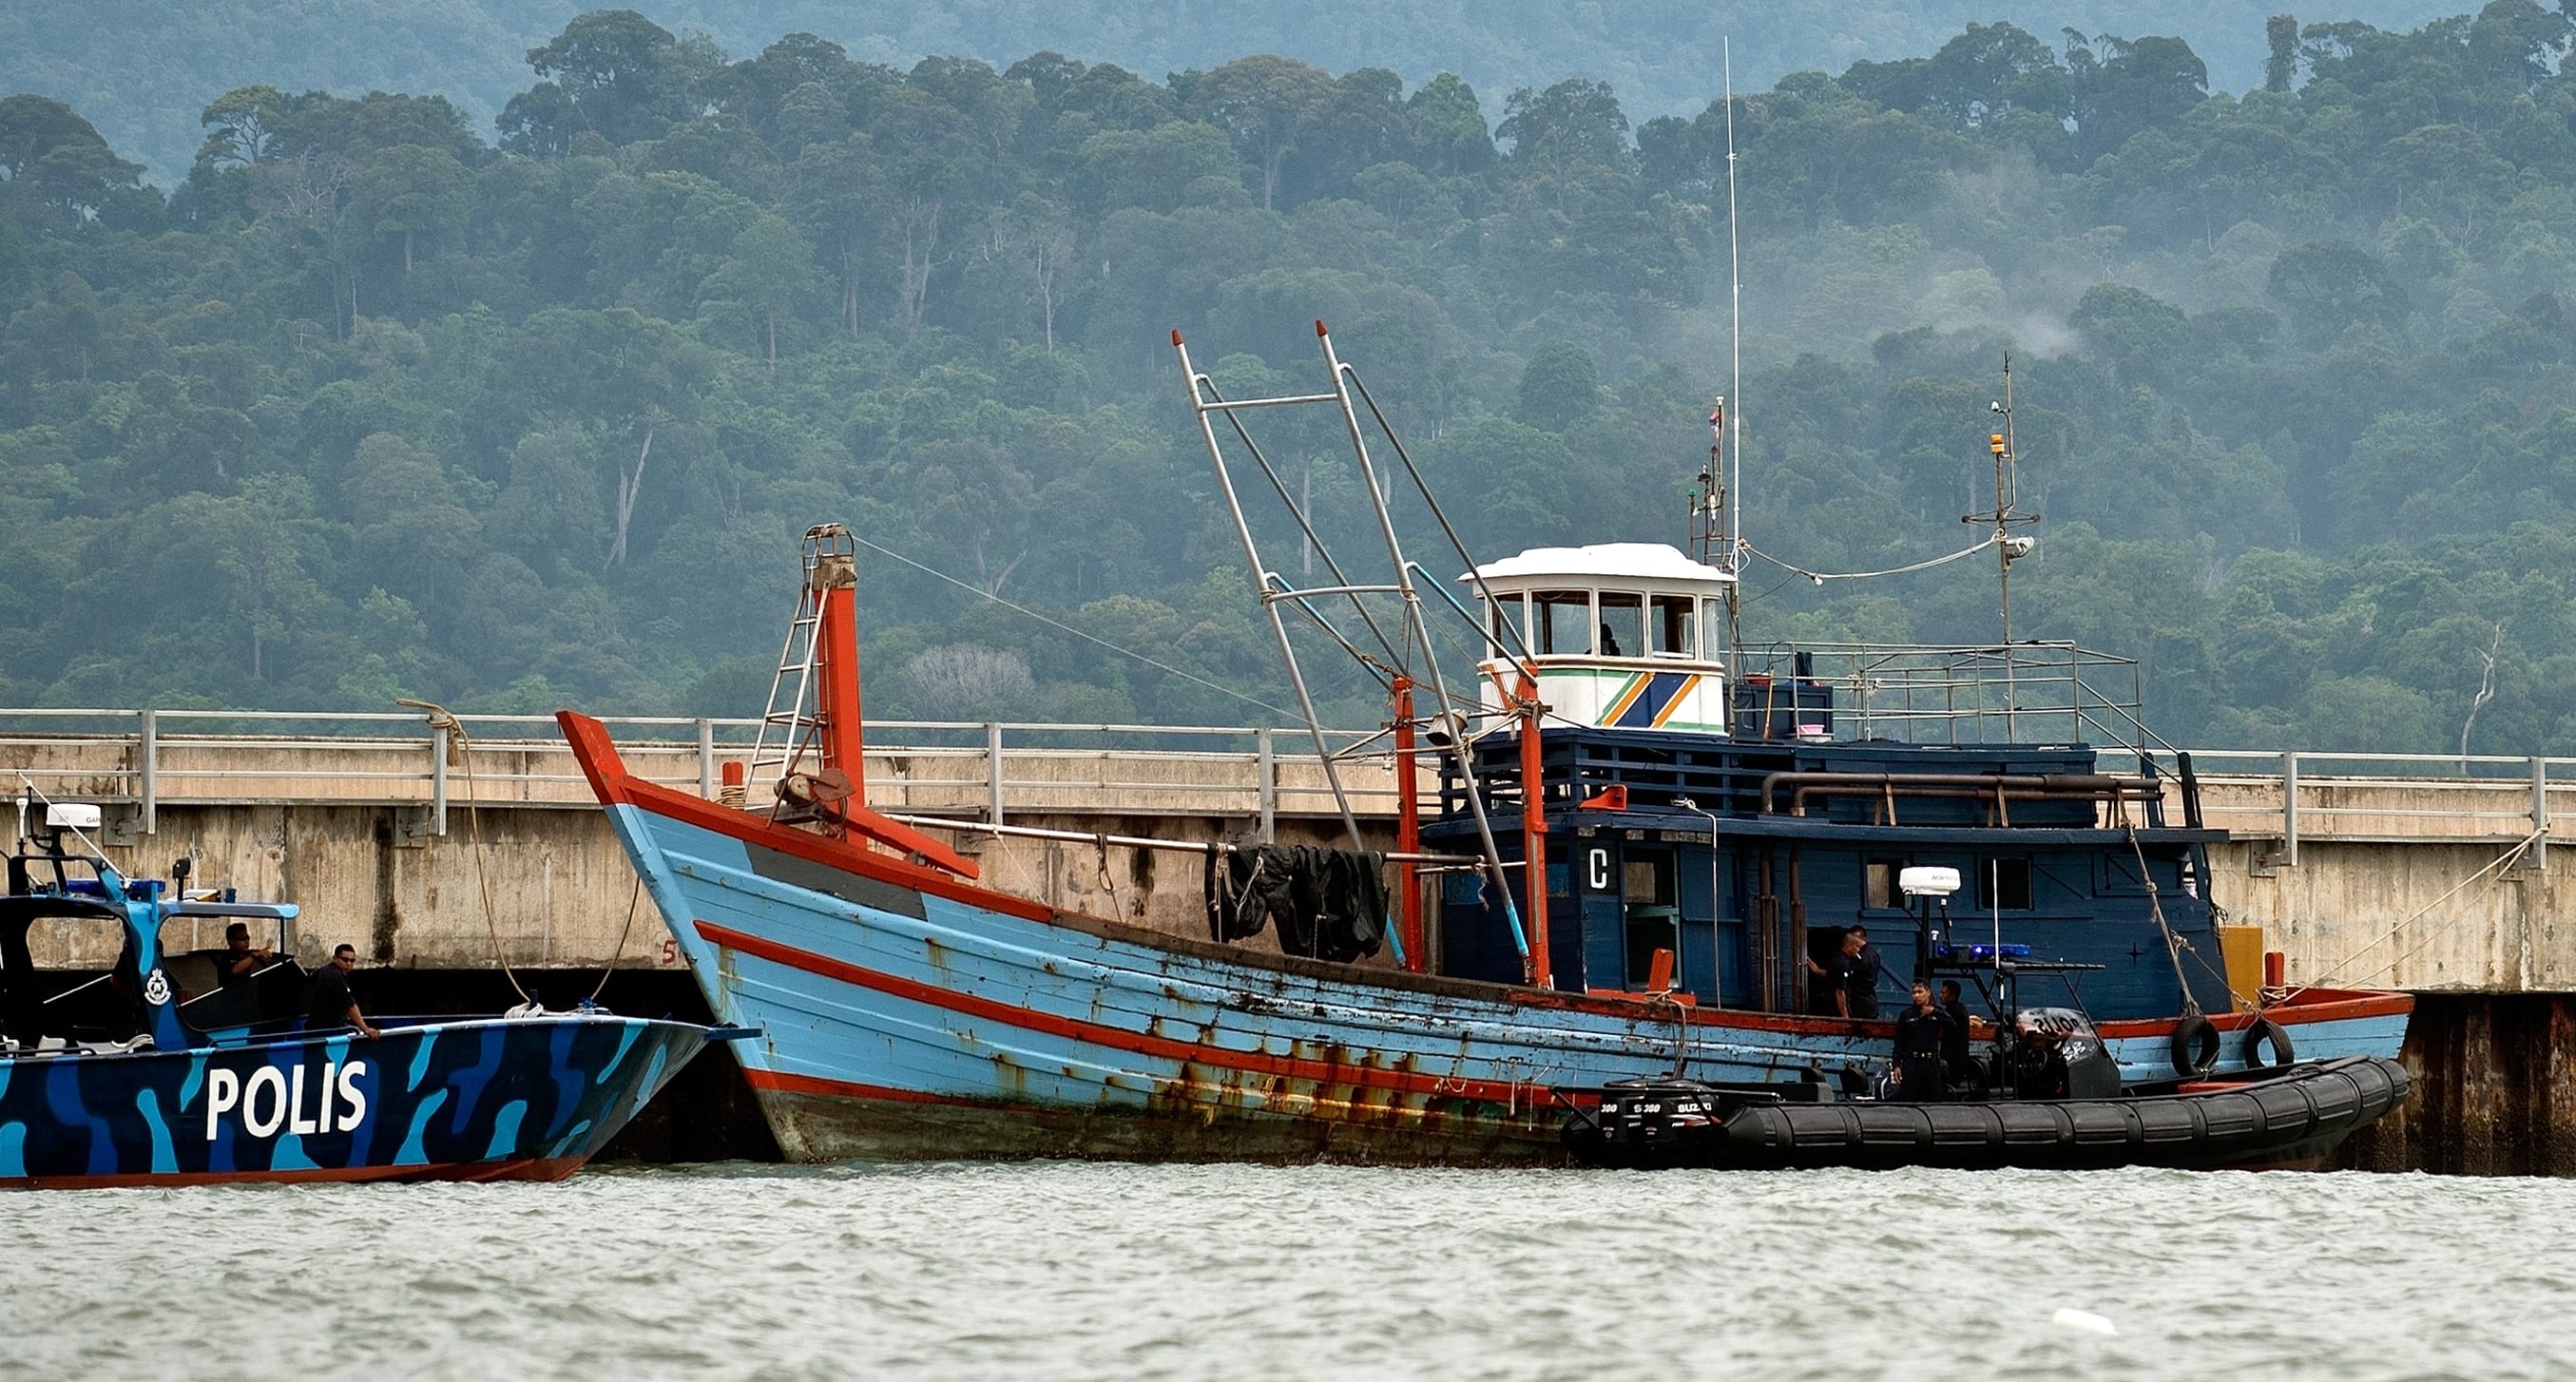 One of the boats which carried illegal migrants, at Langkawi, Malaysia.